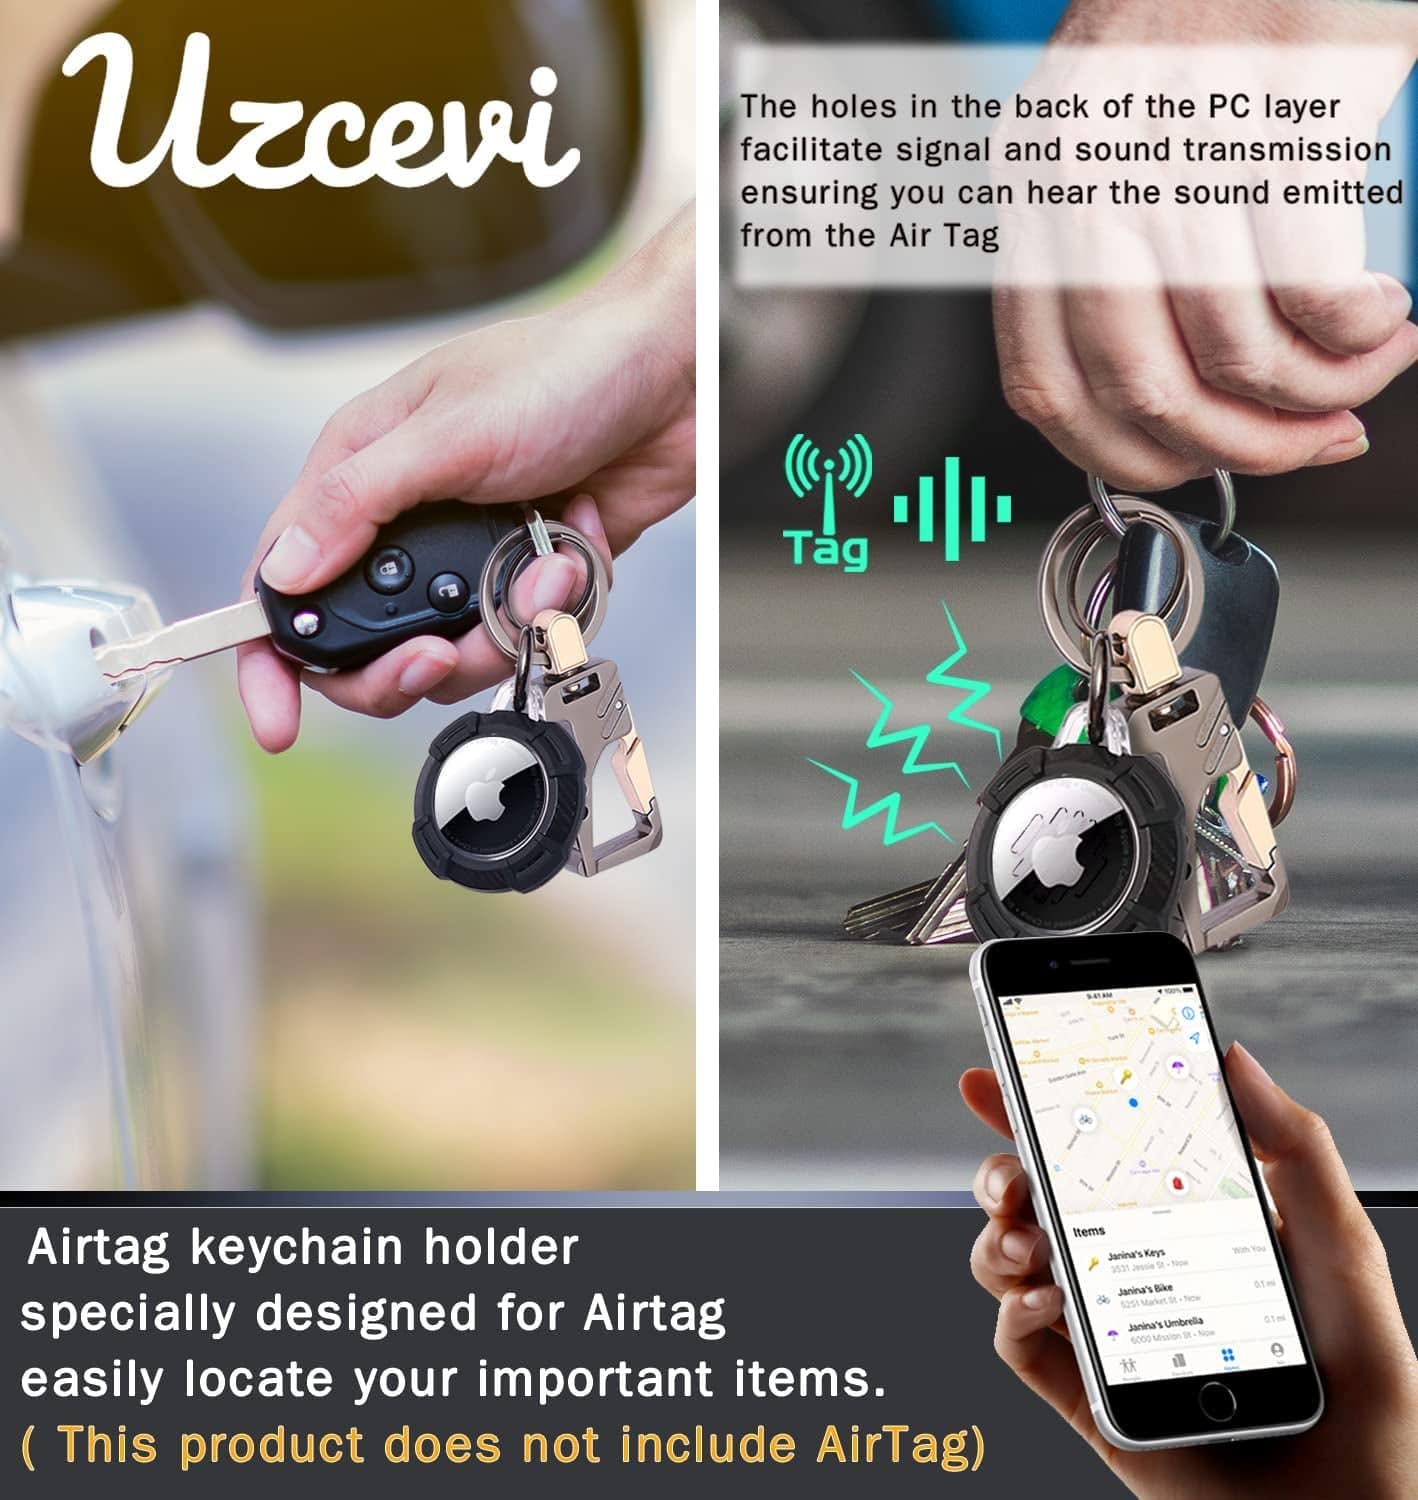 1Pack Airtag Keychain for Apple Airtag Holder, Shockproof Protective Airtags Case Cover,Can Be Used as Keychain for Bottleopeners，Air Tag Keychain Ring Suitable for Backpacks,Wallets,Keys,Pet(Black) Electronics > GPS Accessories > GPS Cases Uzcevi   